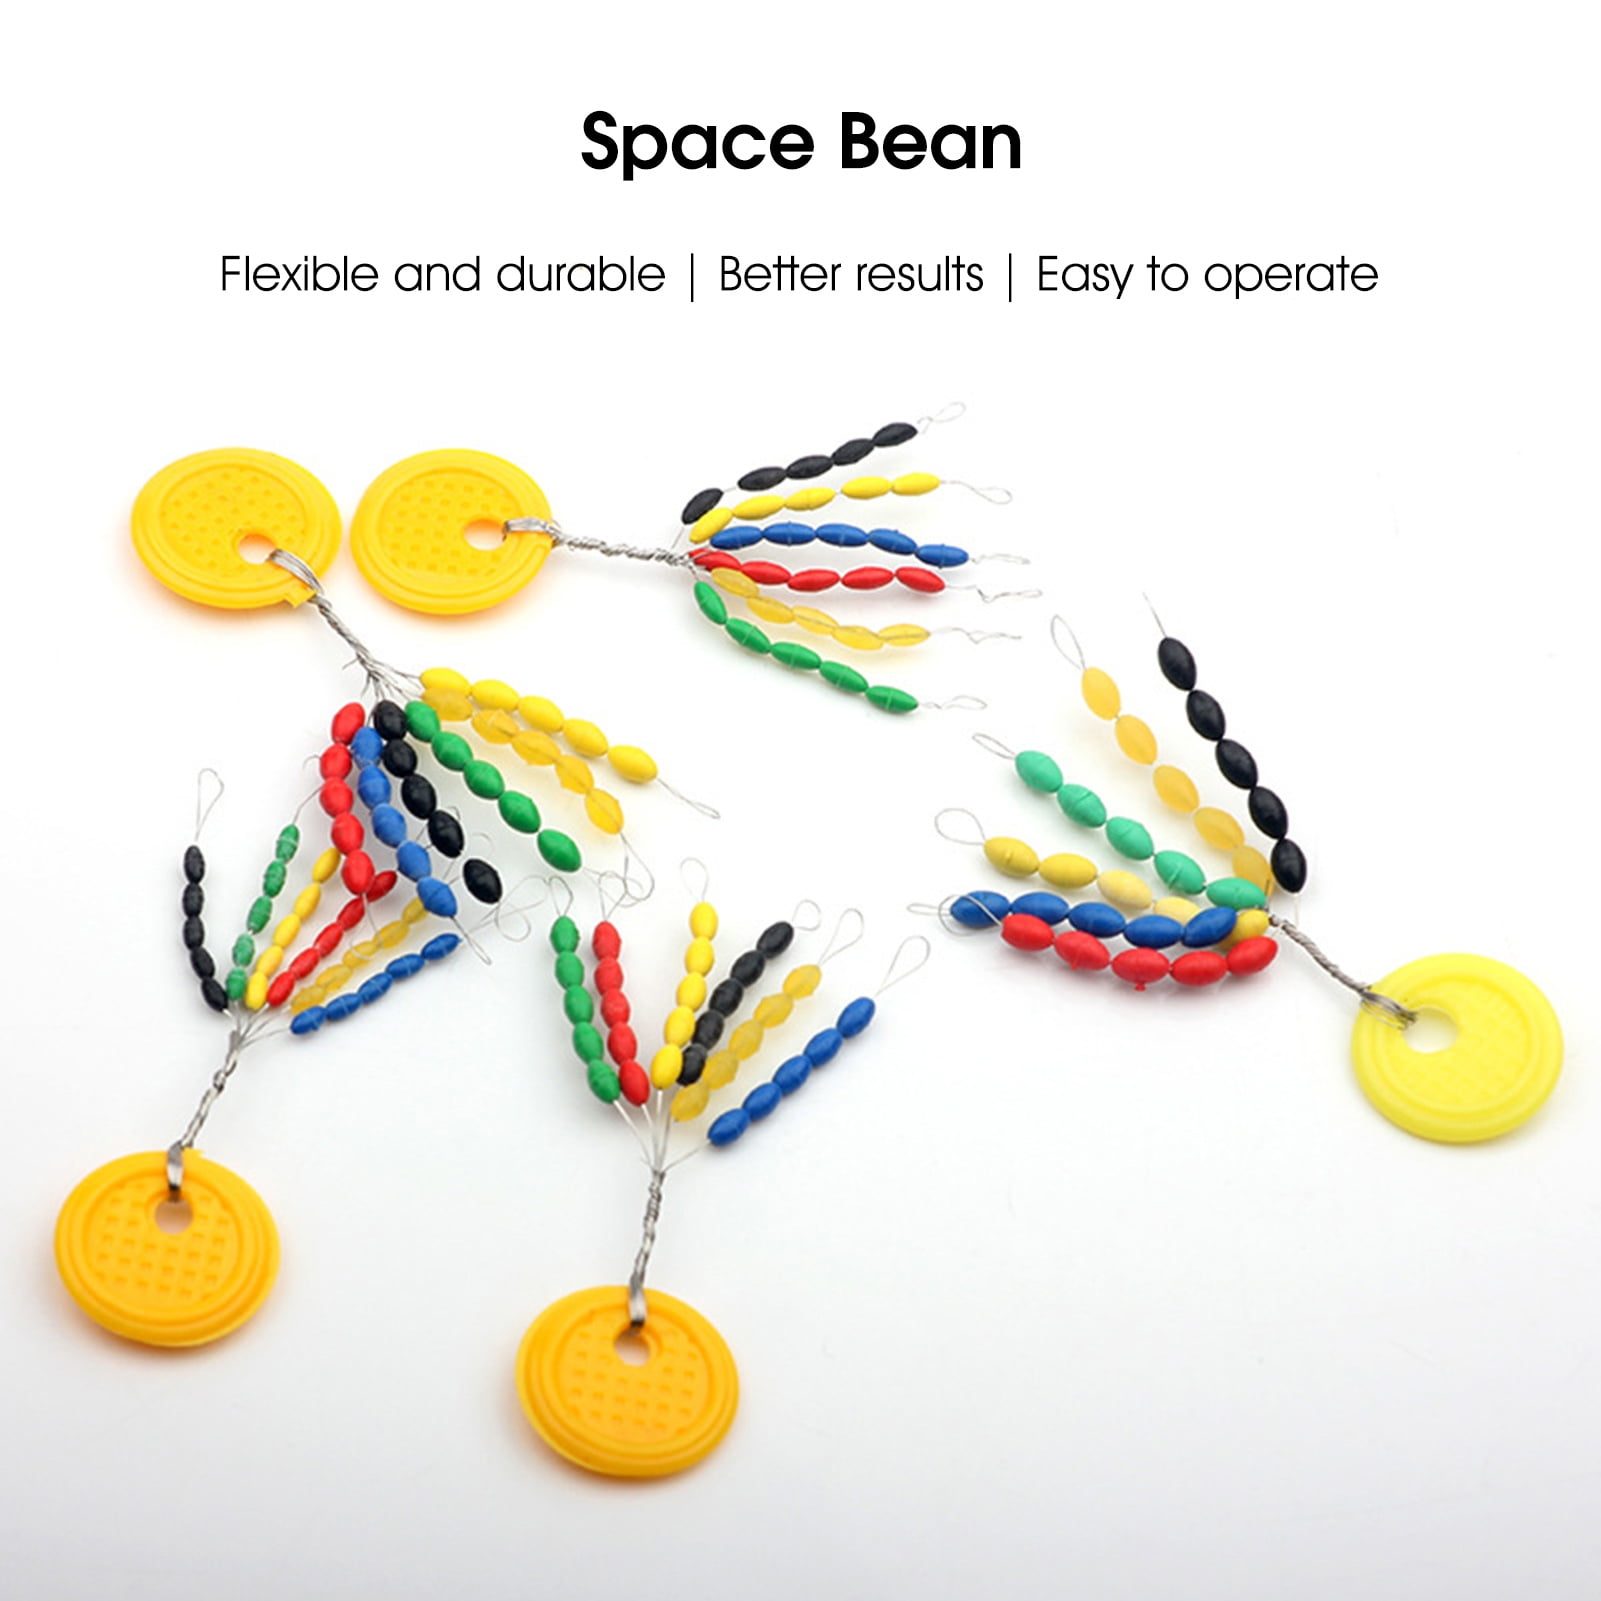 Juhai Rubber Space Beans Bobber Colorful Stable Oval Design Float Space  Beans for Fishing 